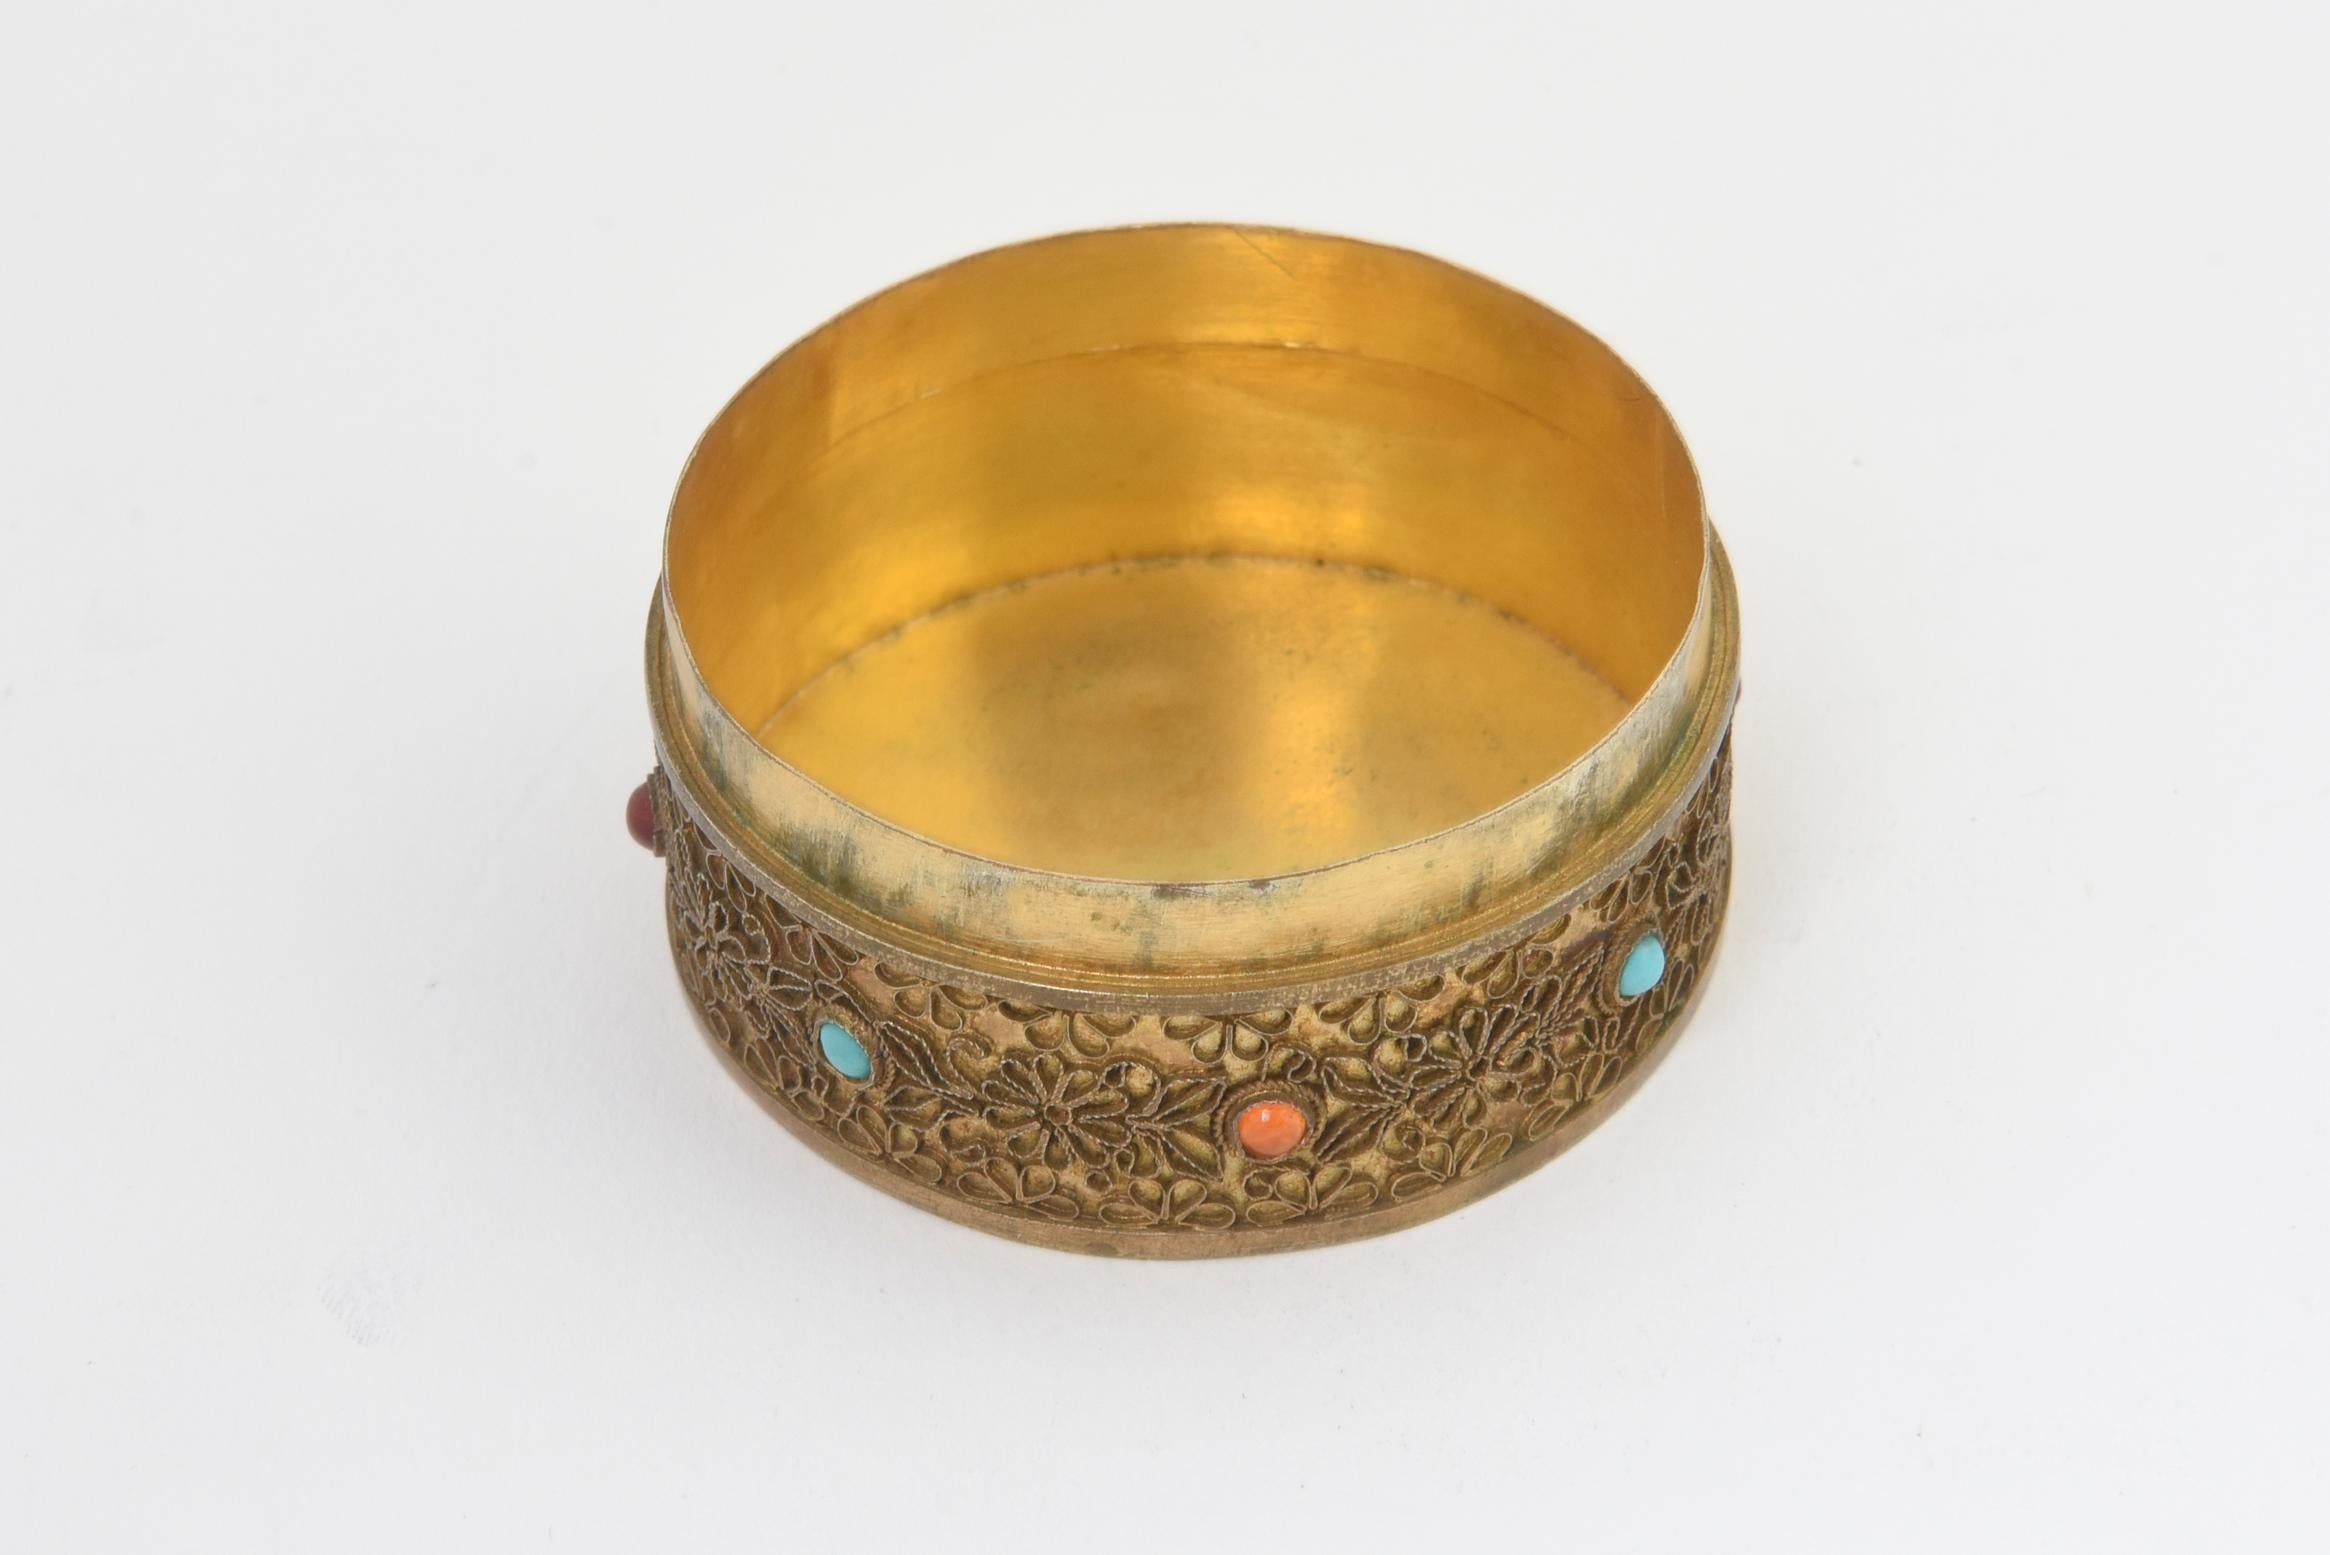 Metalwork Early 20th Century Antique Asian Jeweled Gilt-Brass Trinket Box For Sale